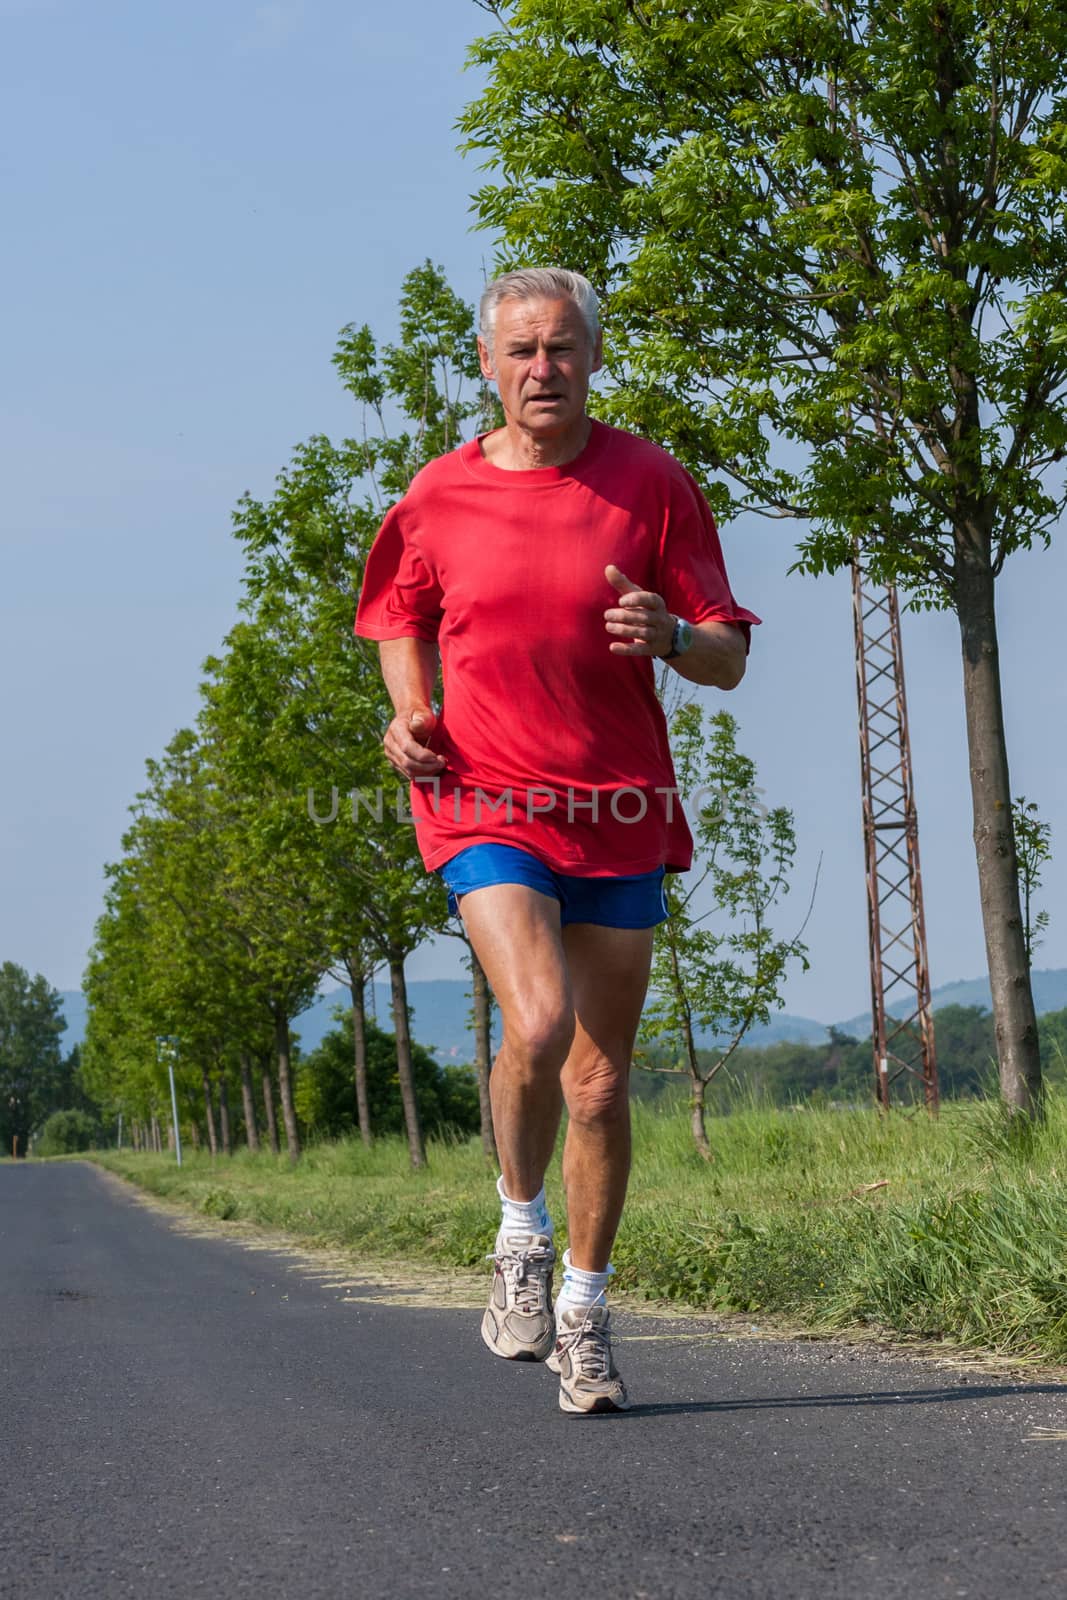 Senior runner while training for a competition by Digoarpi